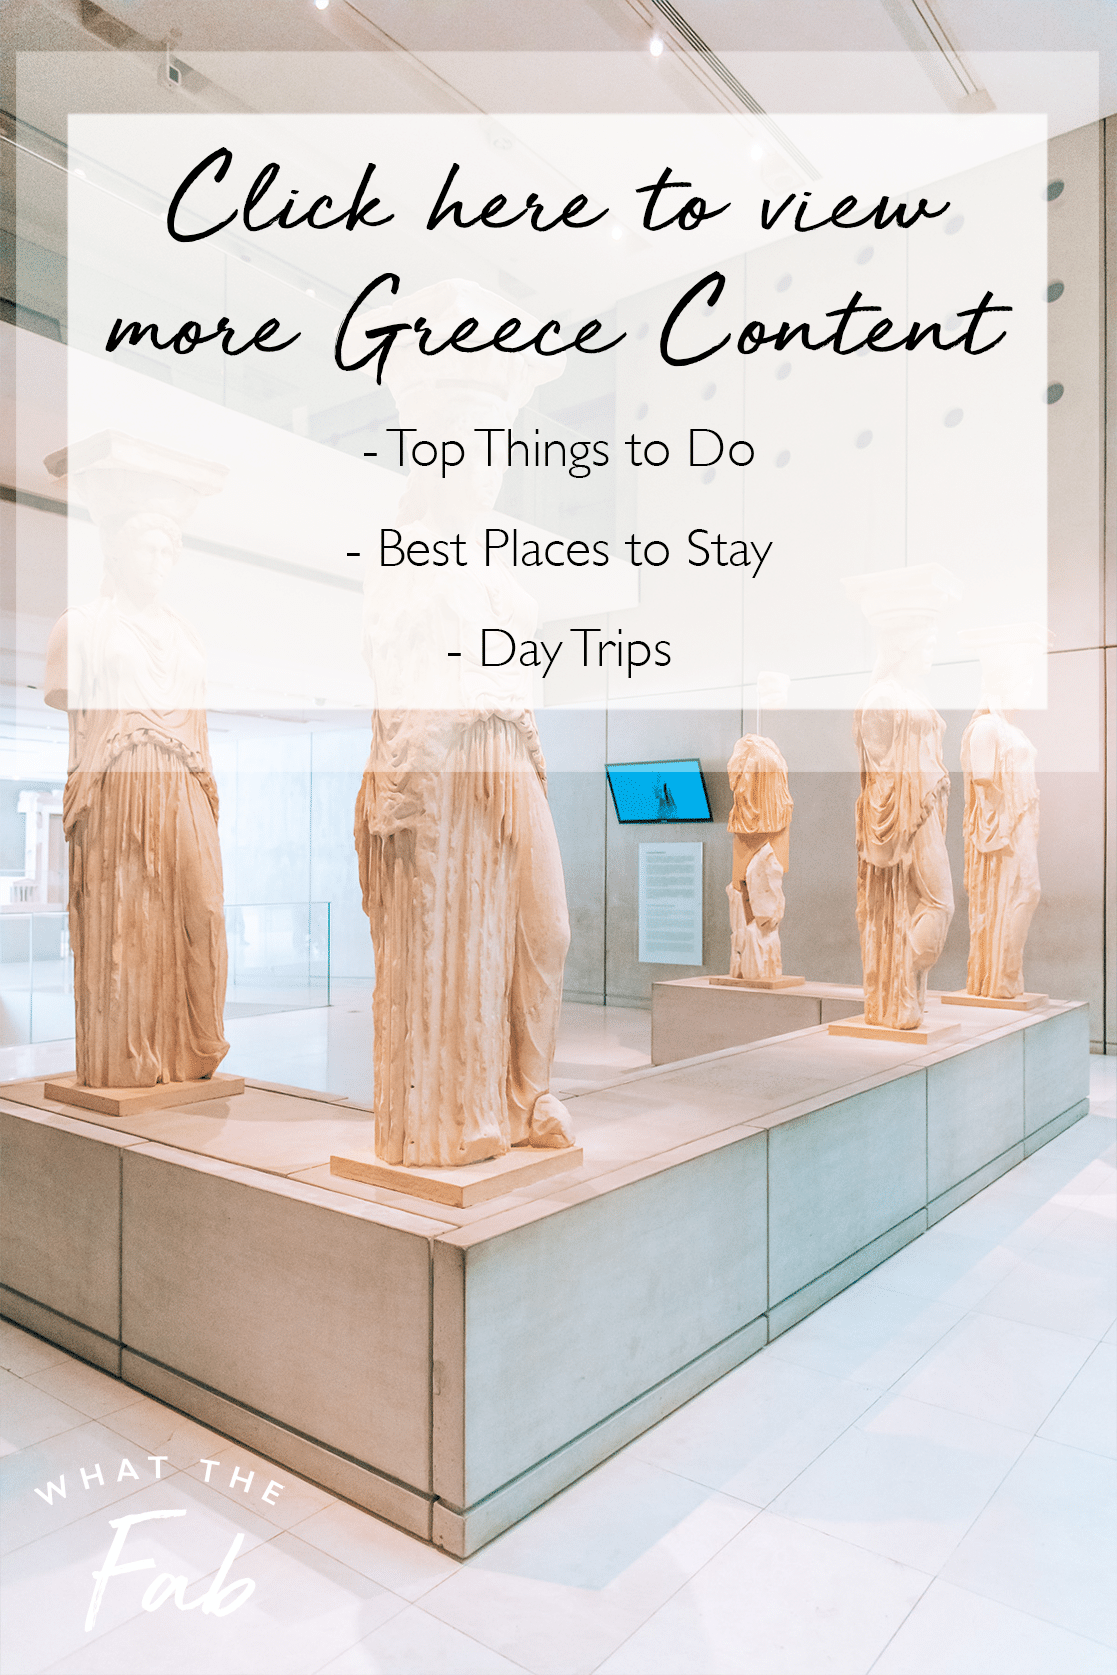 help planning a trip to greece